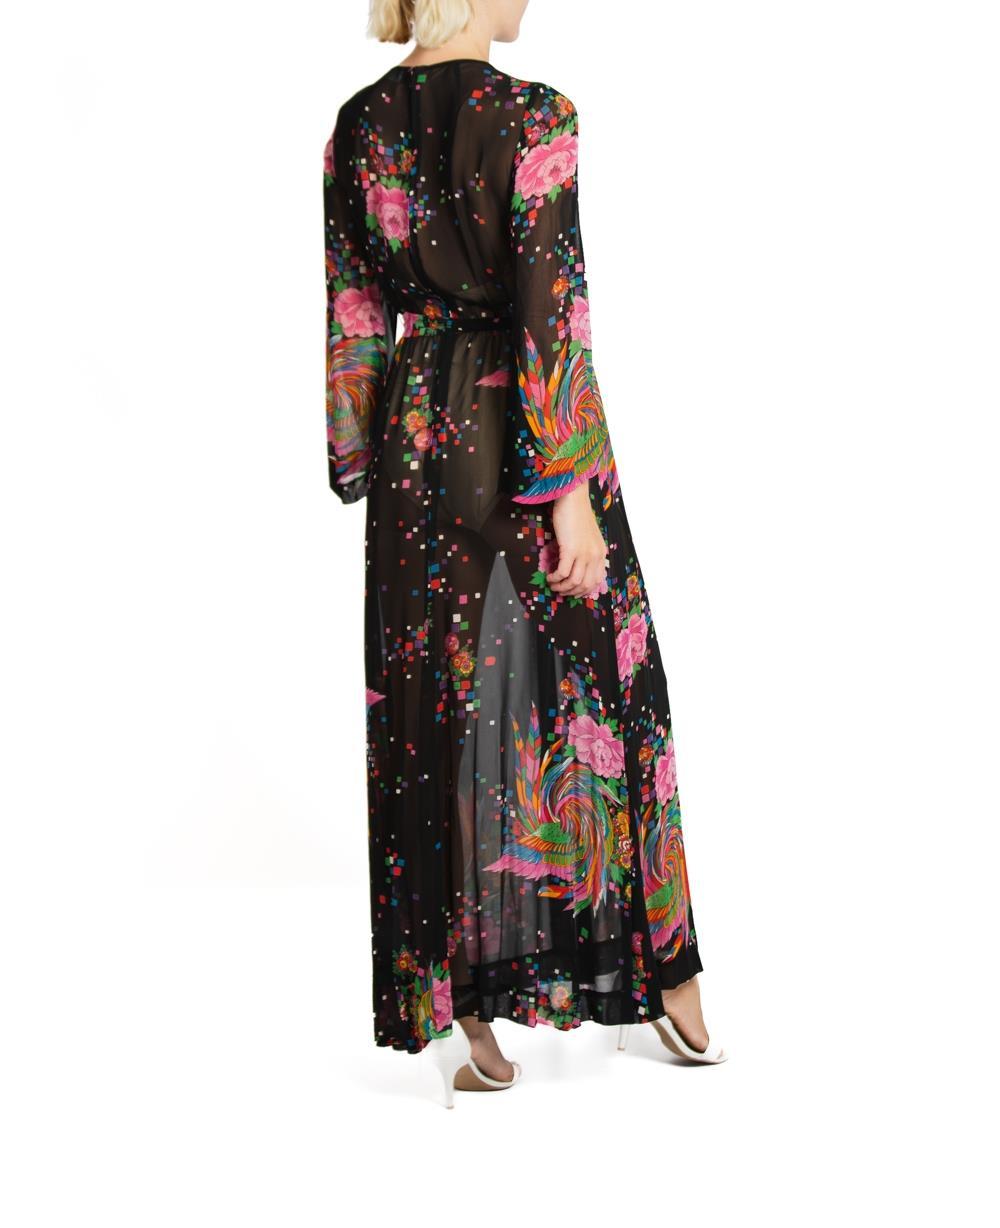 1970S Malcolm Starr Black & Floral Rayon Sheer Dress Made In Italy For Sale 4